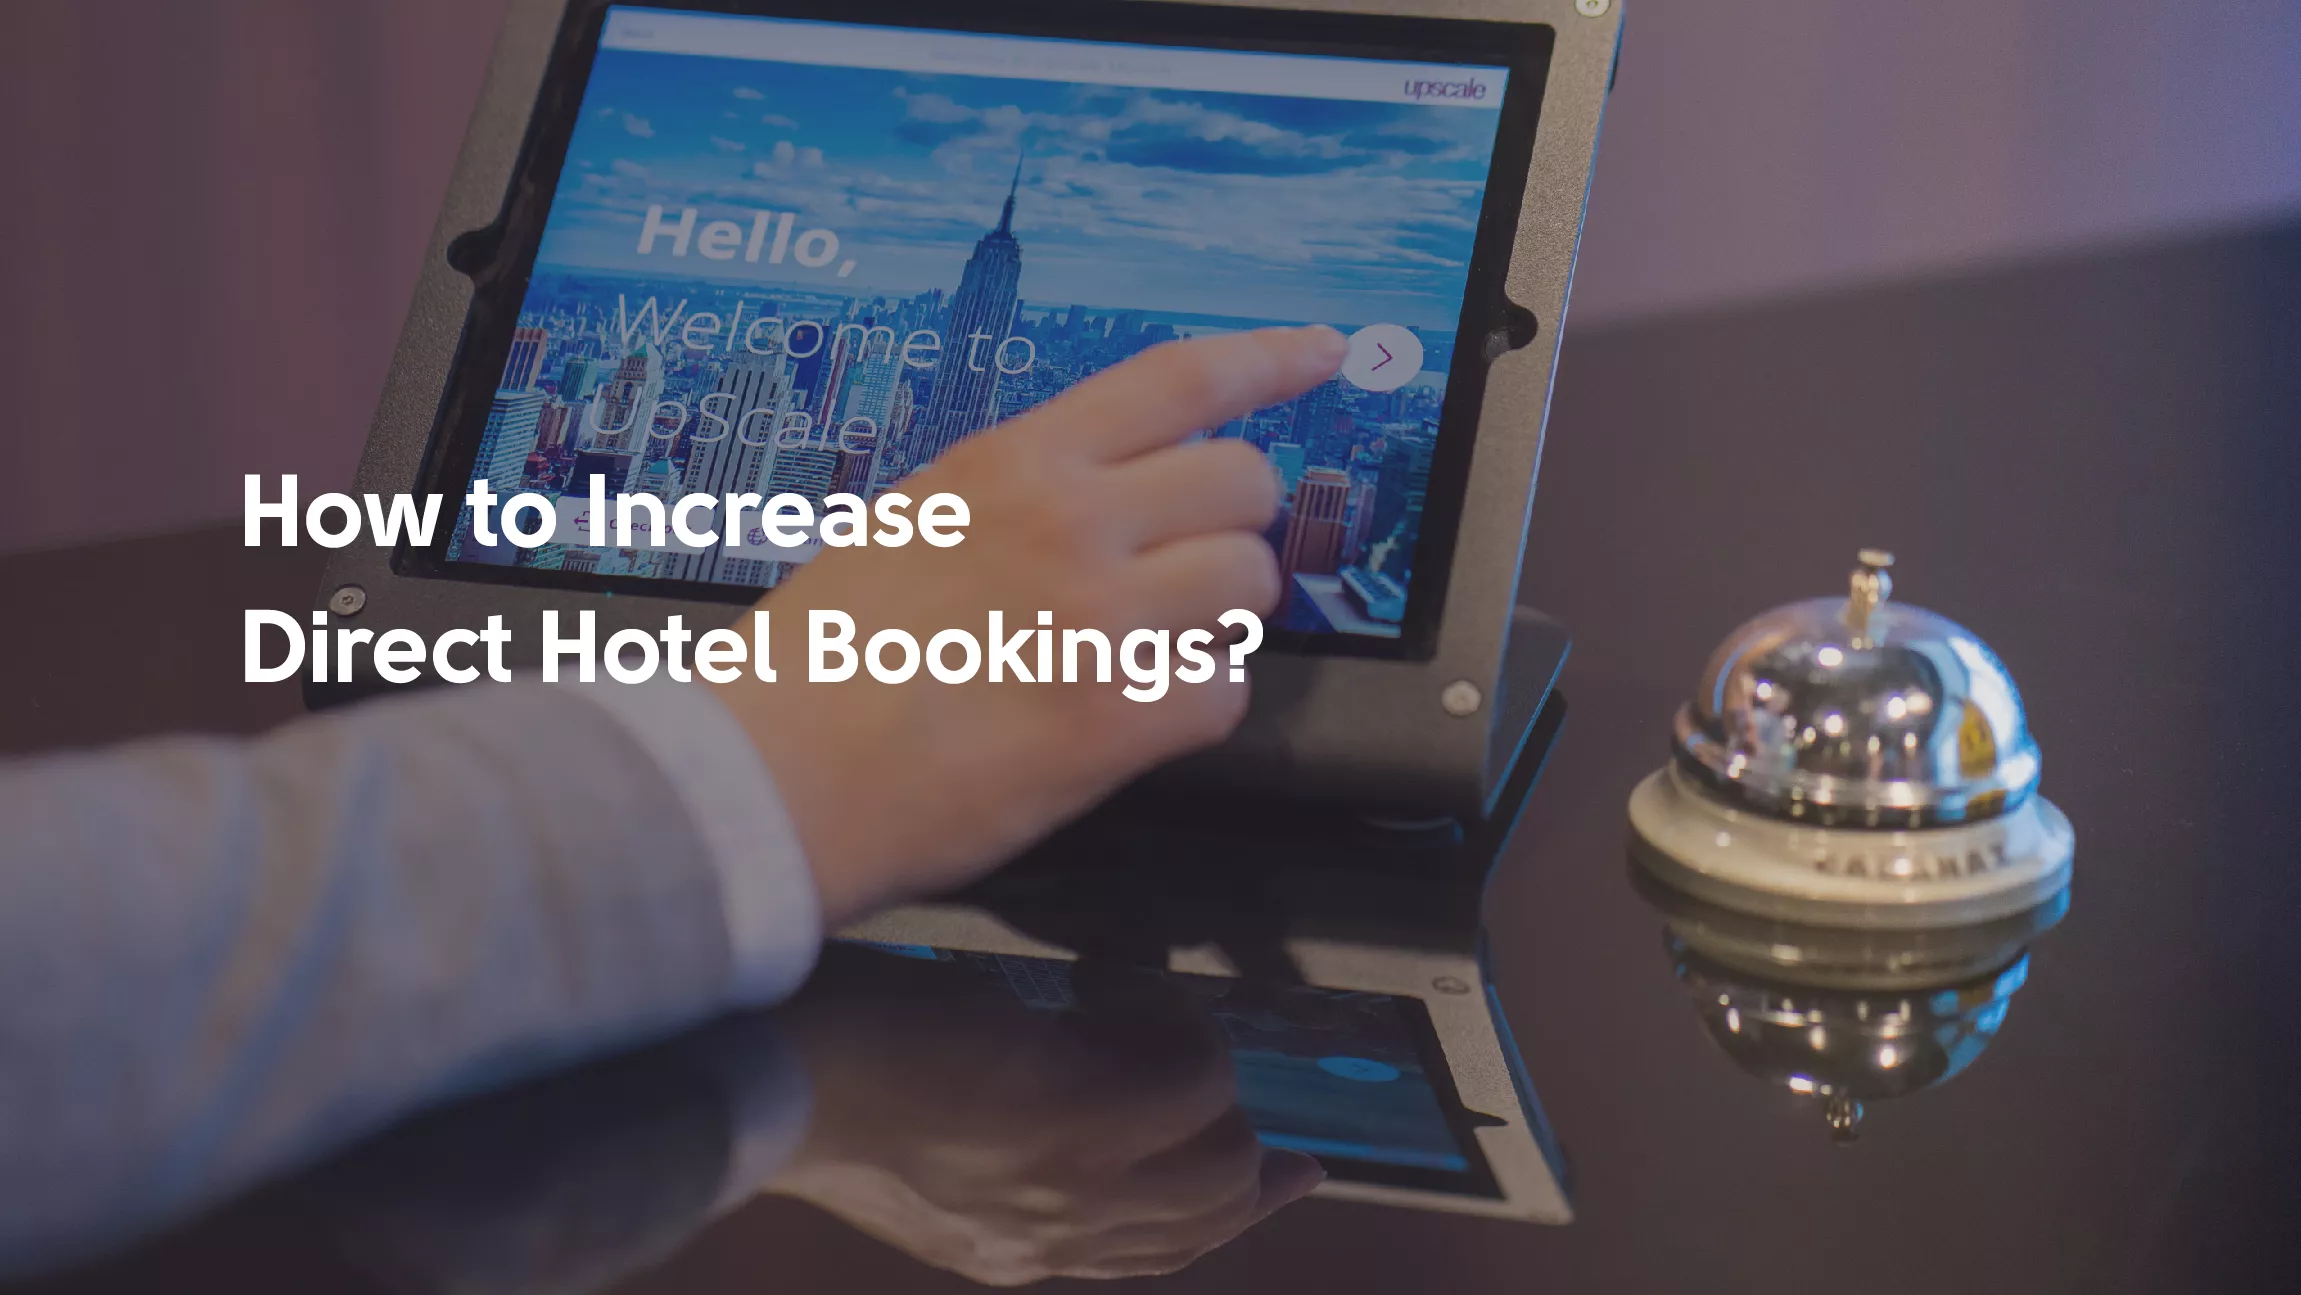 Direct Hotel Bookings